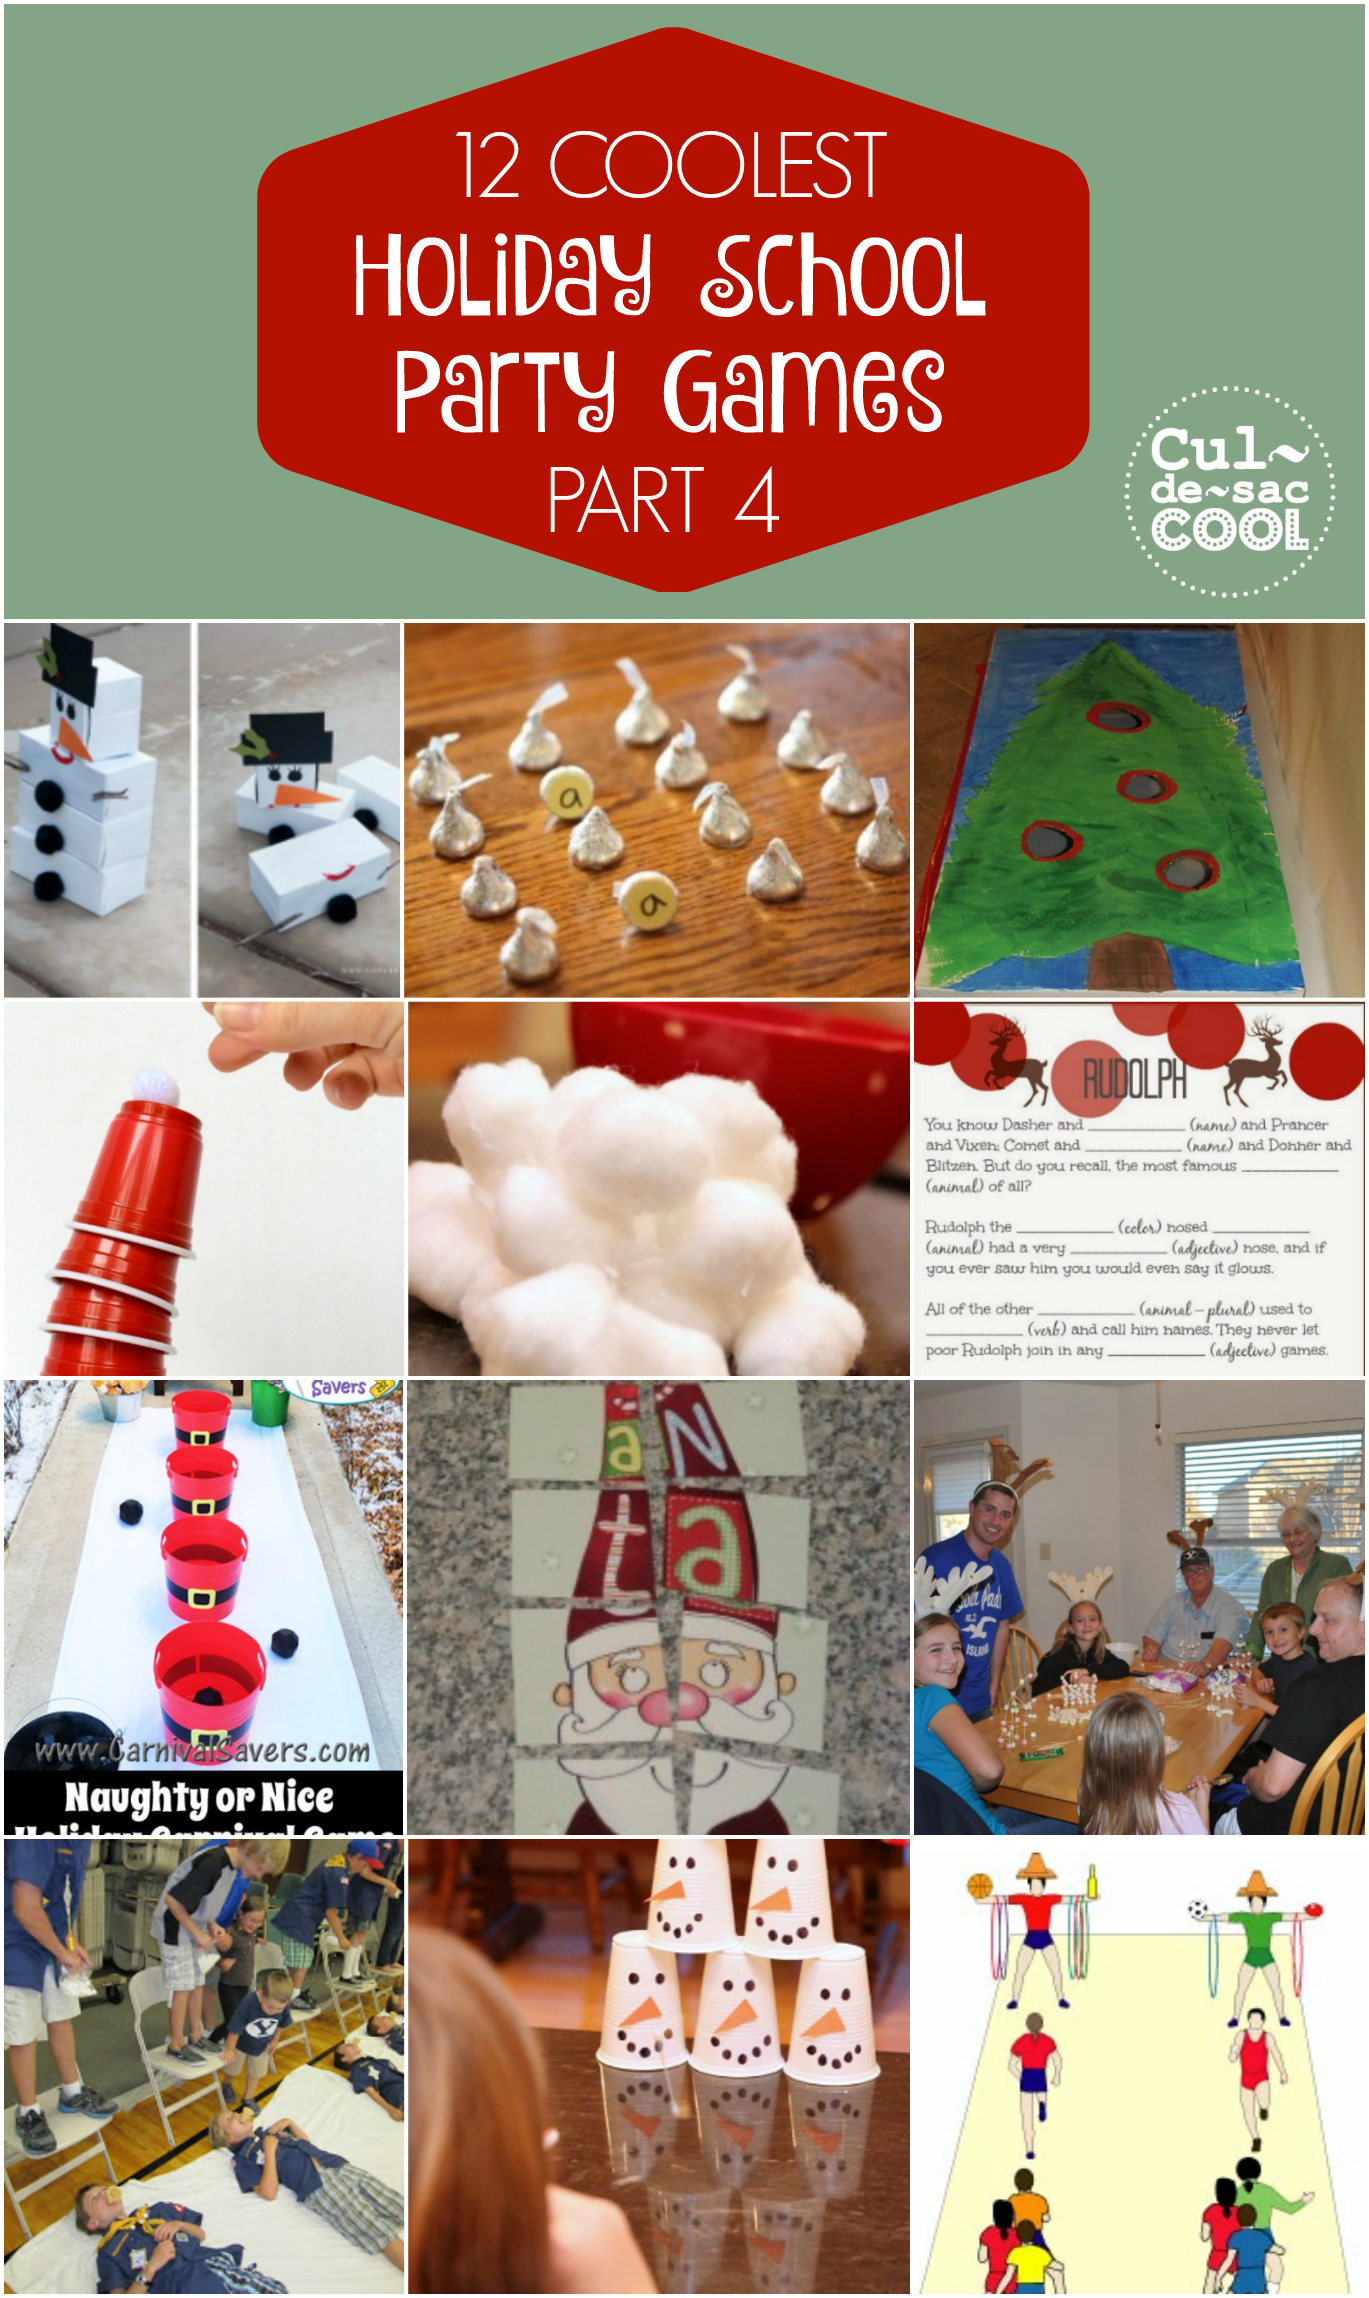 12 Coolest Holiday School Party Games Part 4Collage